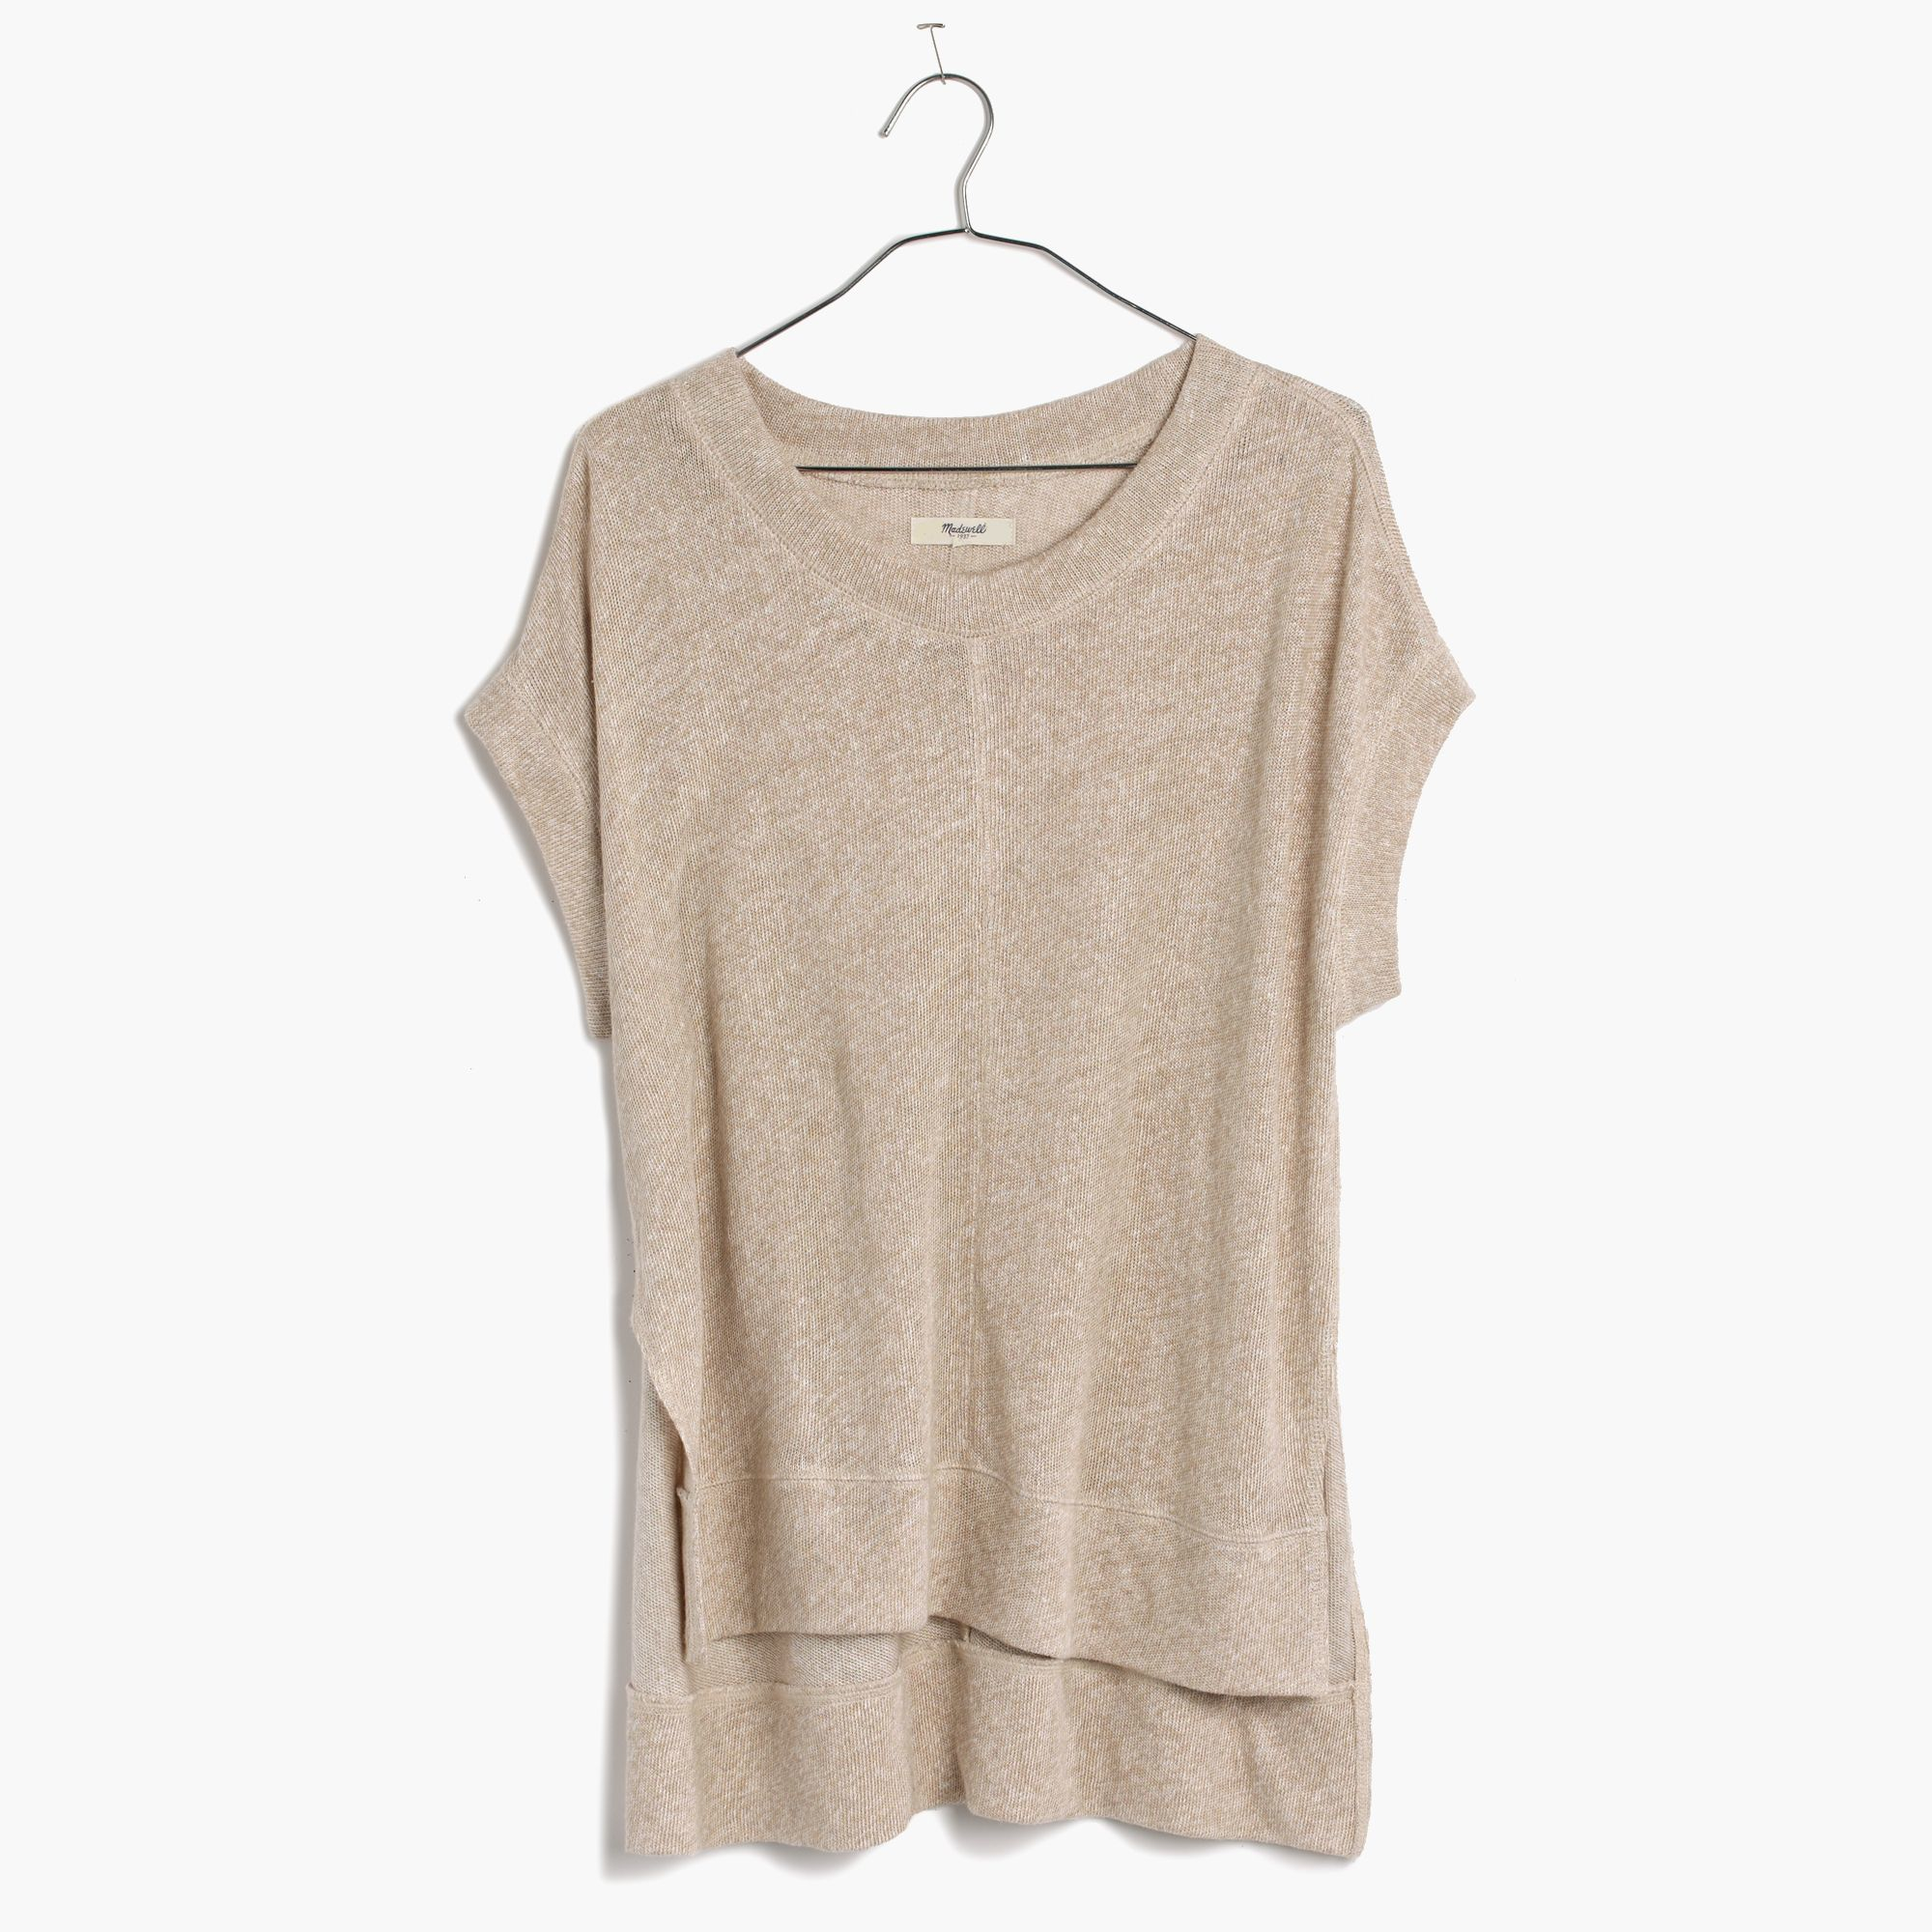 Madewell Linen Side-vent Tunic Tee in Beige (marled sand) | Lyst